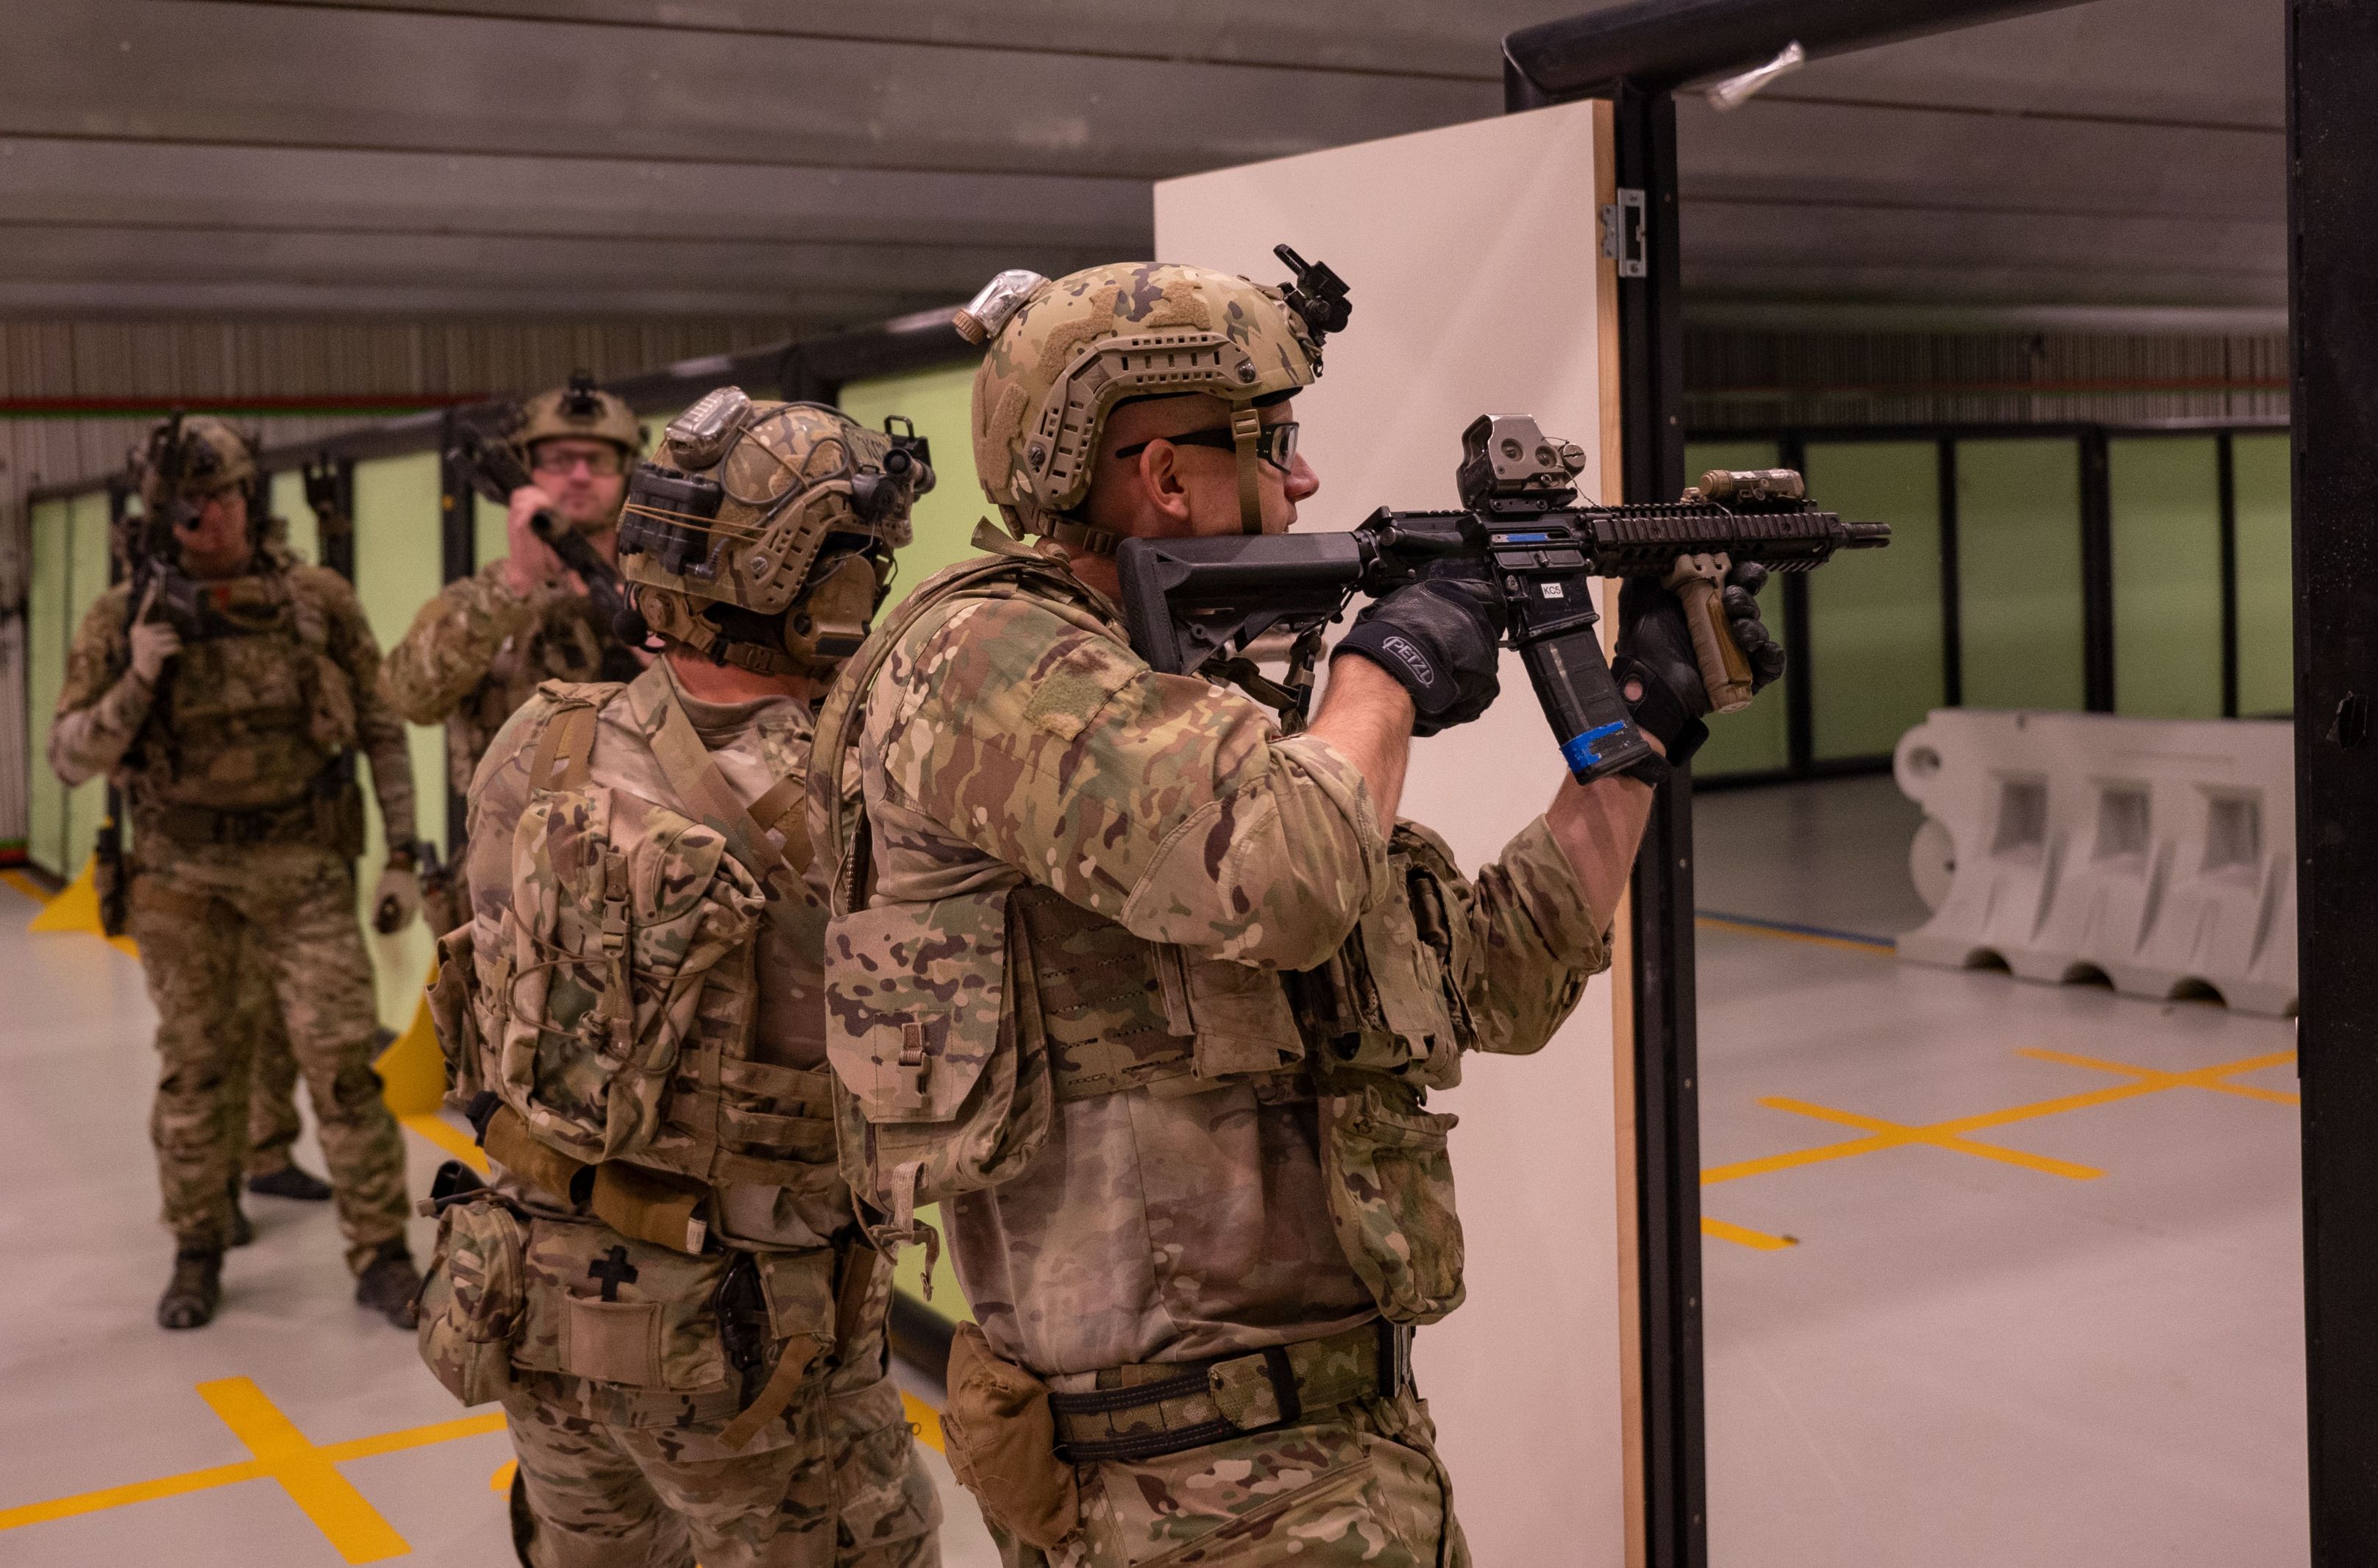 Operators from a U.S. Naval Special Warfare Unit shoot simulated targets while conducting close quarter combat training with the Australian Army 2nd Commando Regiment at Holsworthy Barracks in New South Wales, Australia during Talisman Sabre, July 20, 2023.